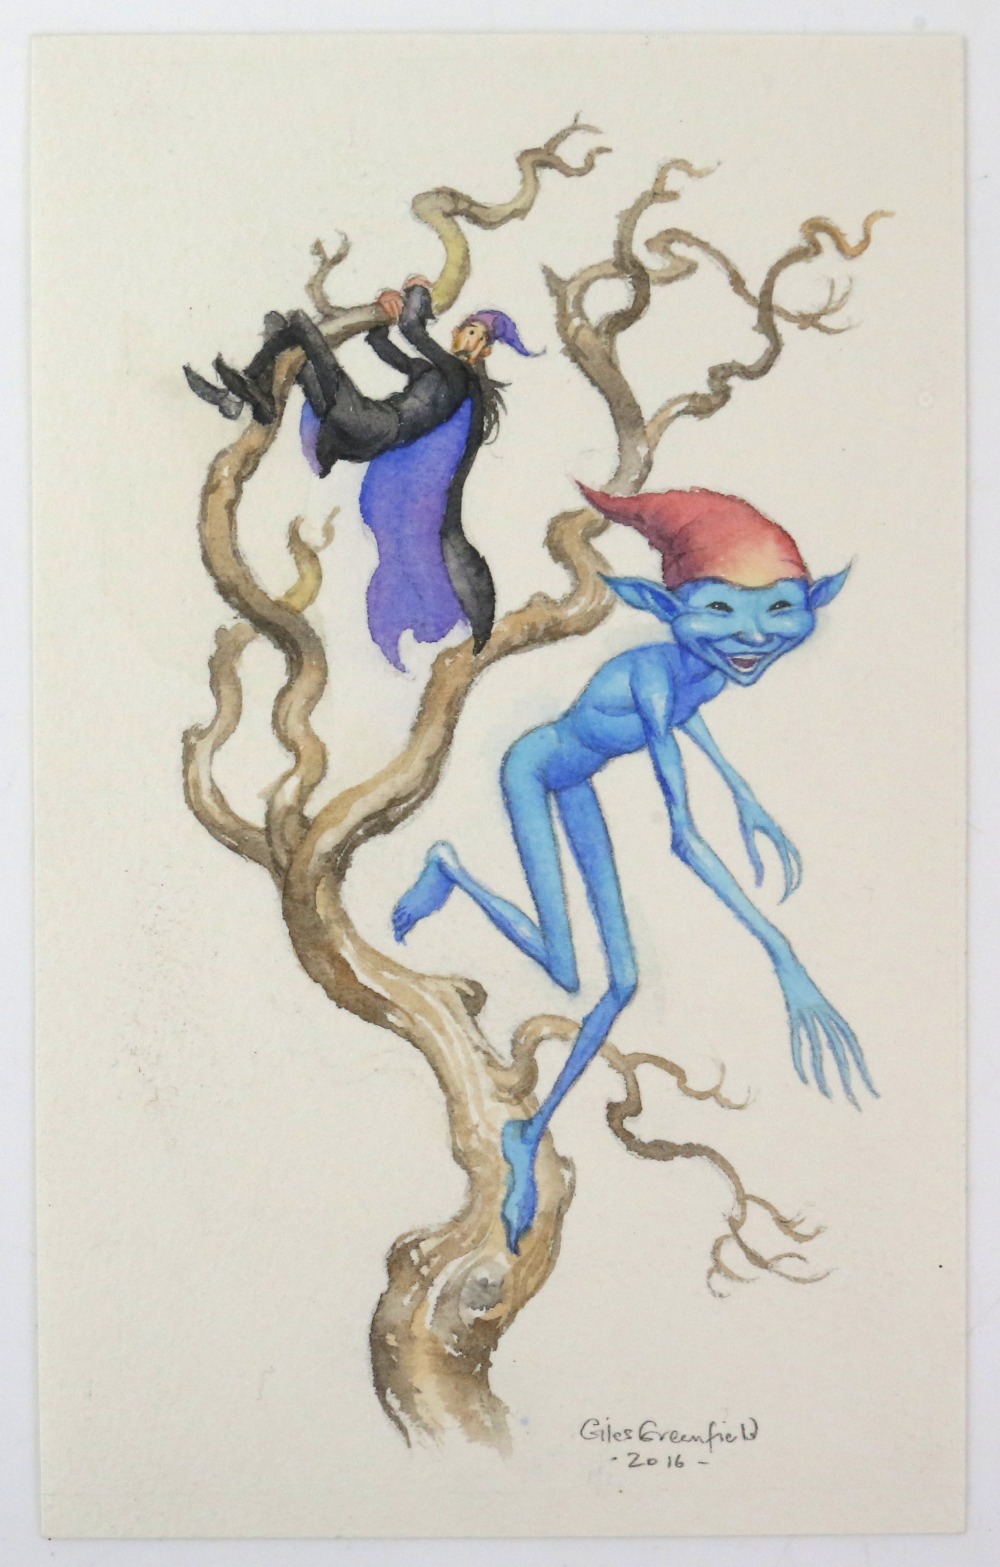 Fantastic Beasts and Where to Find Them (2016) Original Giles Greenfield watercolour 'Pixie' from - Image 2 of 6